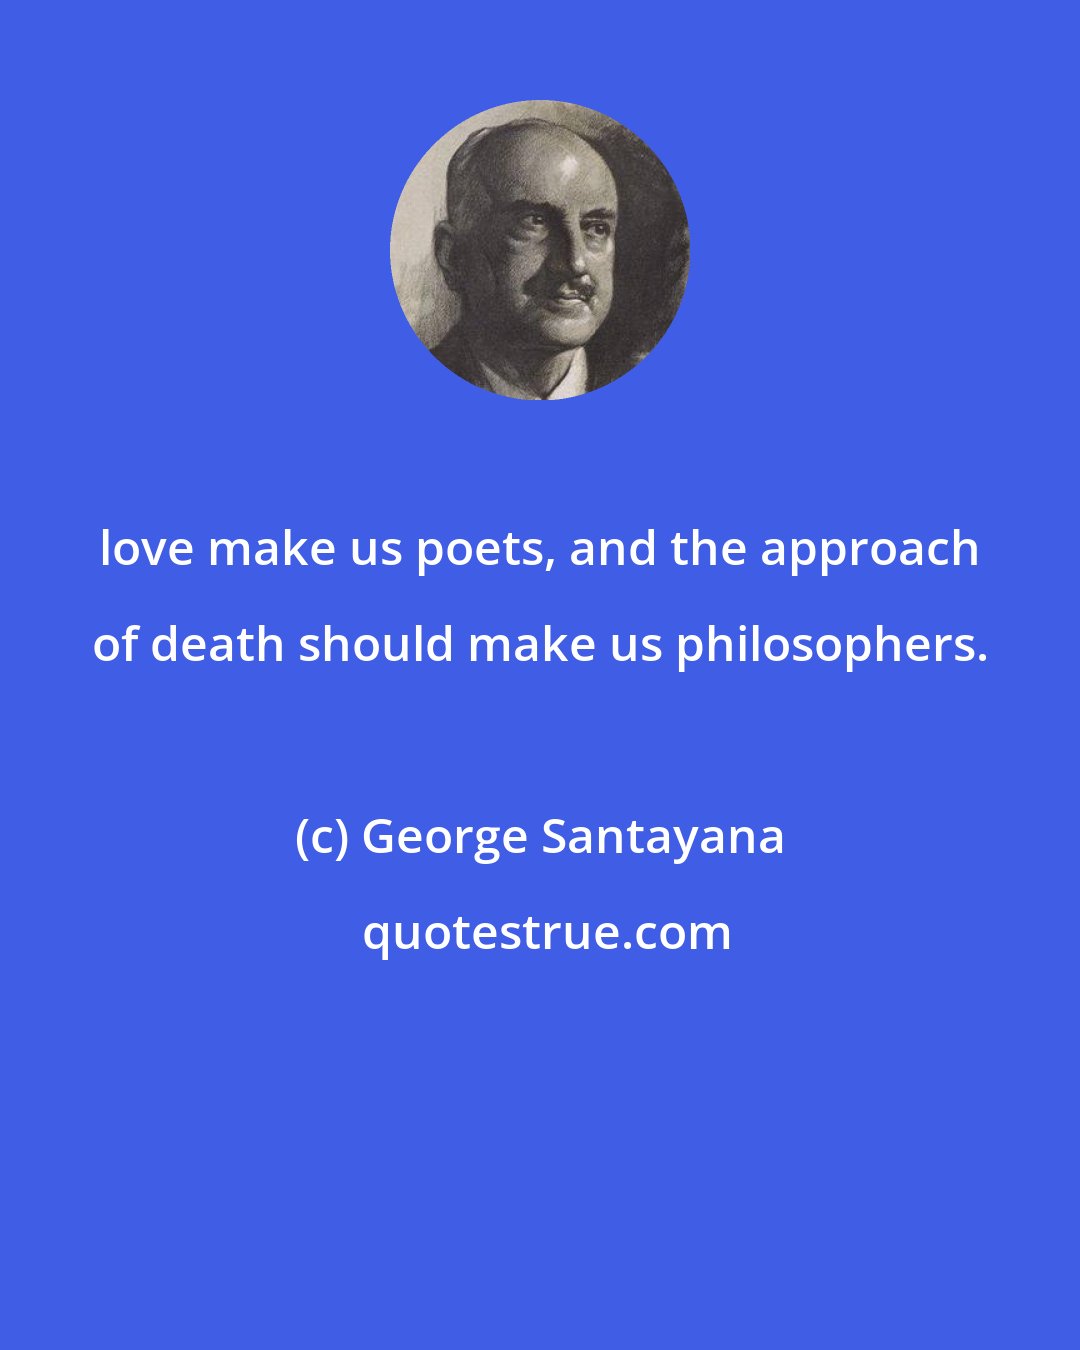 George Santayana: love make us poets, and the approach of death should make us philosophers.